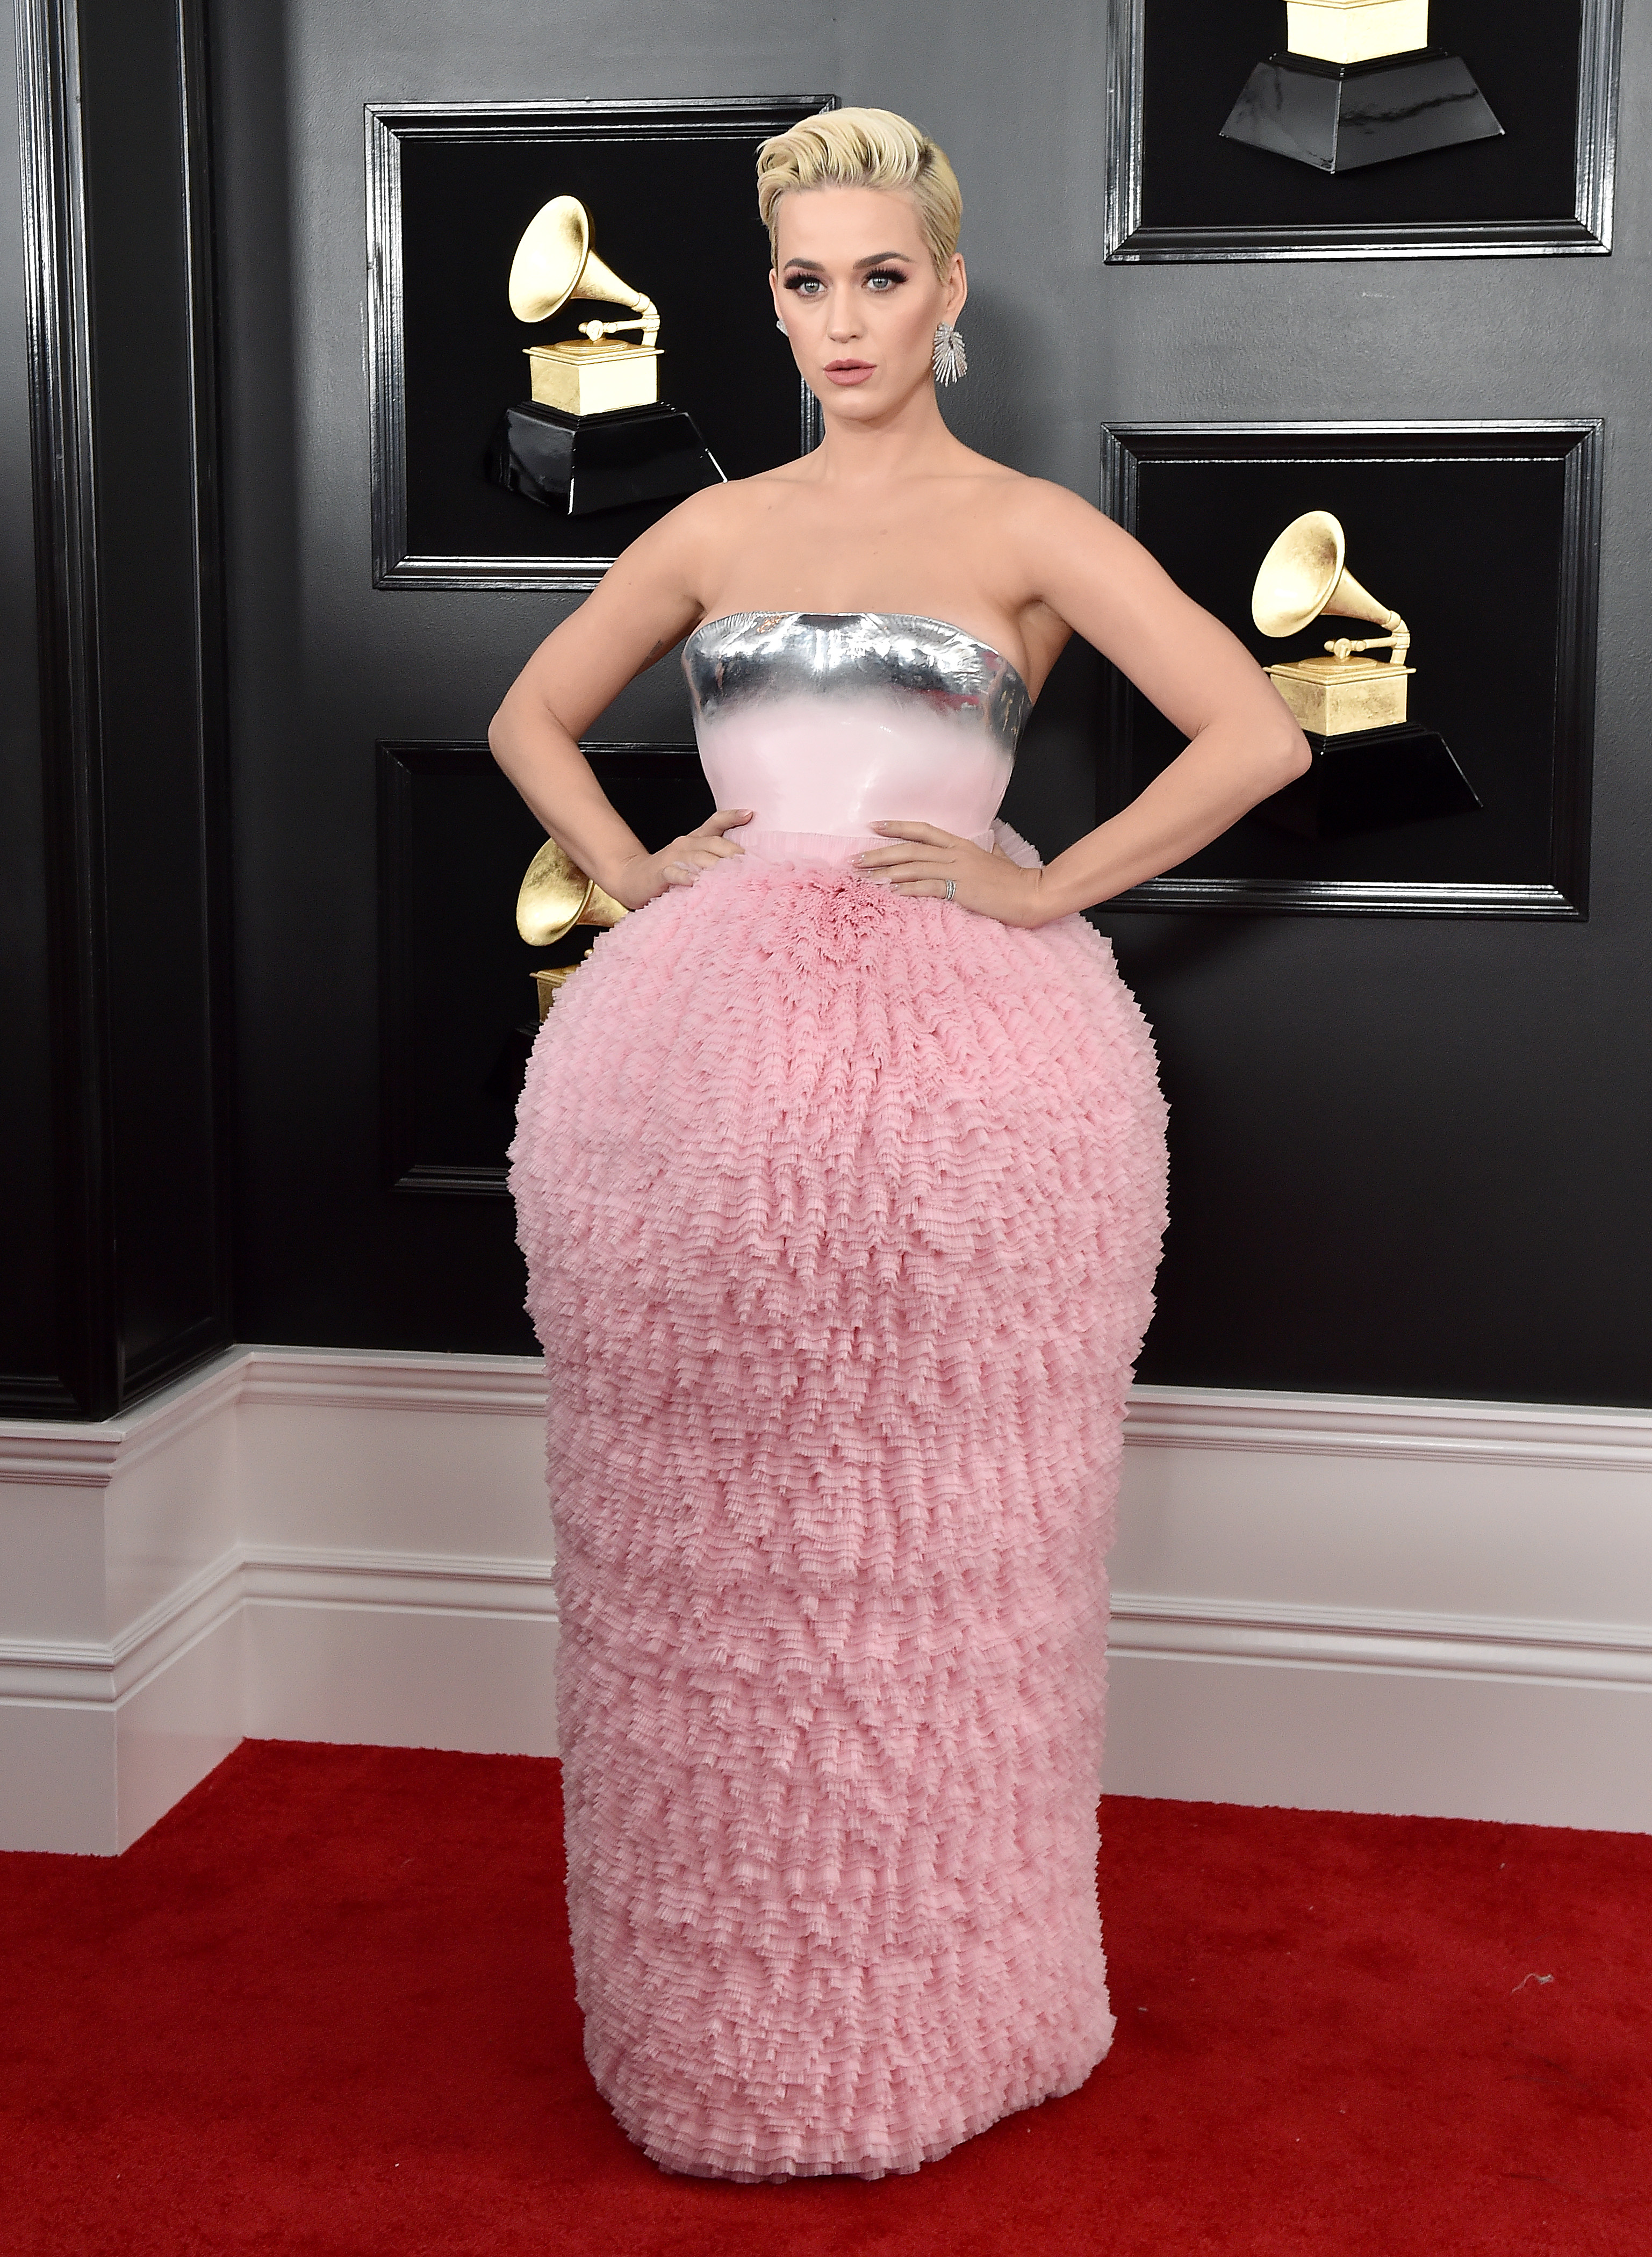 Katy Perry attends the 61st GRAMMY Awards on February 10, 2019. (Photo by Axelle/Bauer-Griffin/FilmMagic) (Axelle/Bauer-Griffin—FilmMagic)